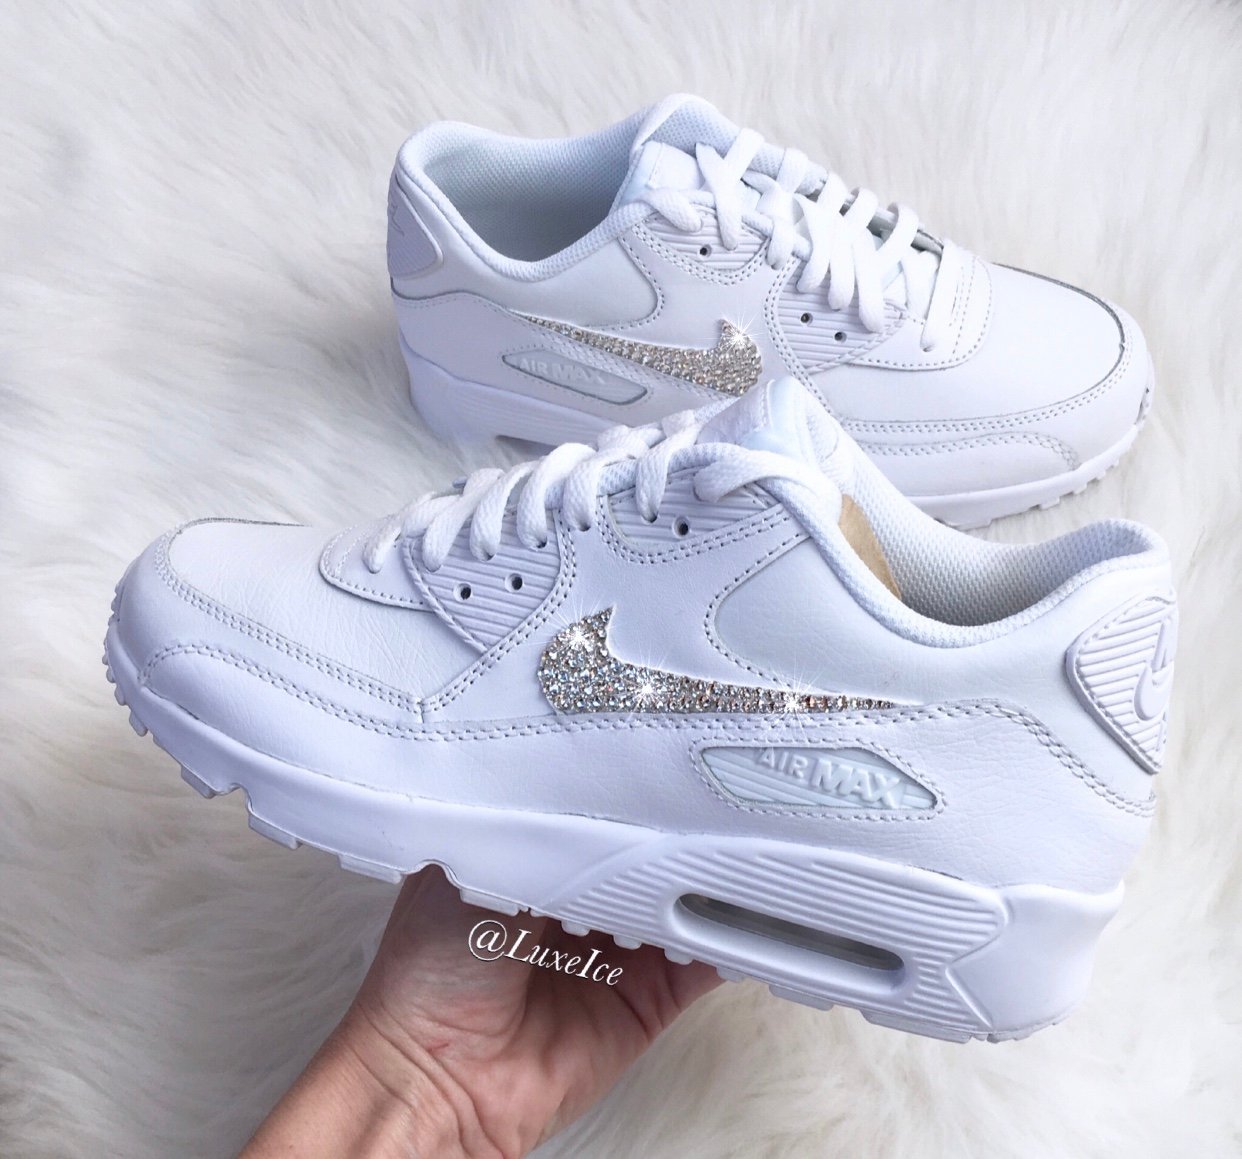 Image of Nike Air Max 90 Women's Shoes White with Swarovski Crystals. 